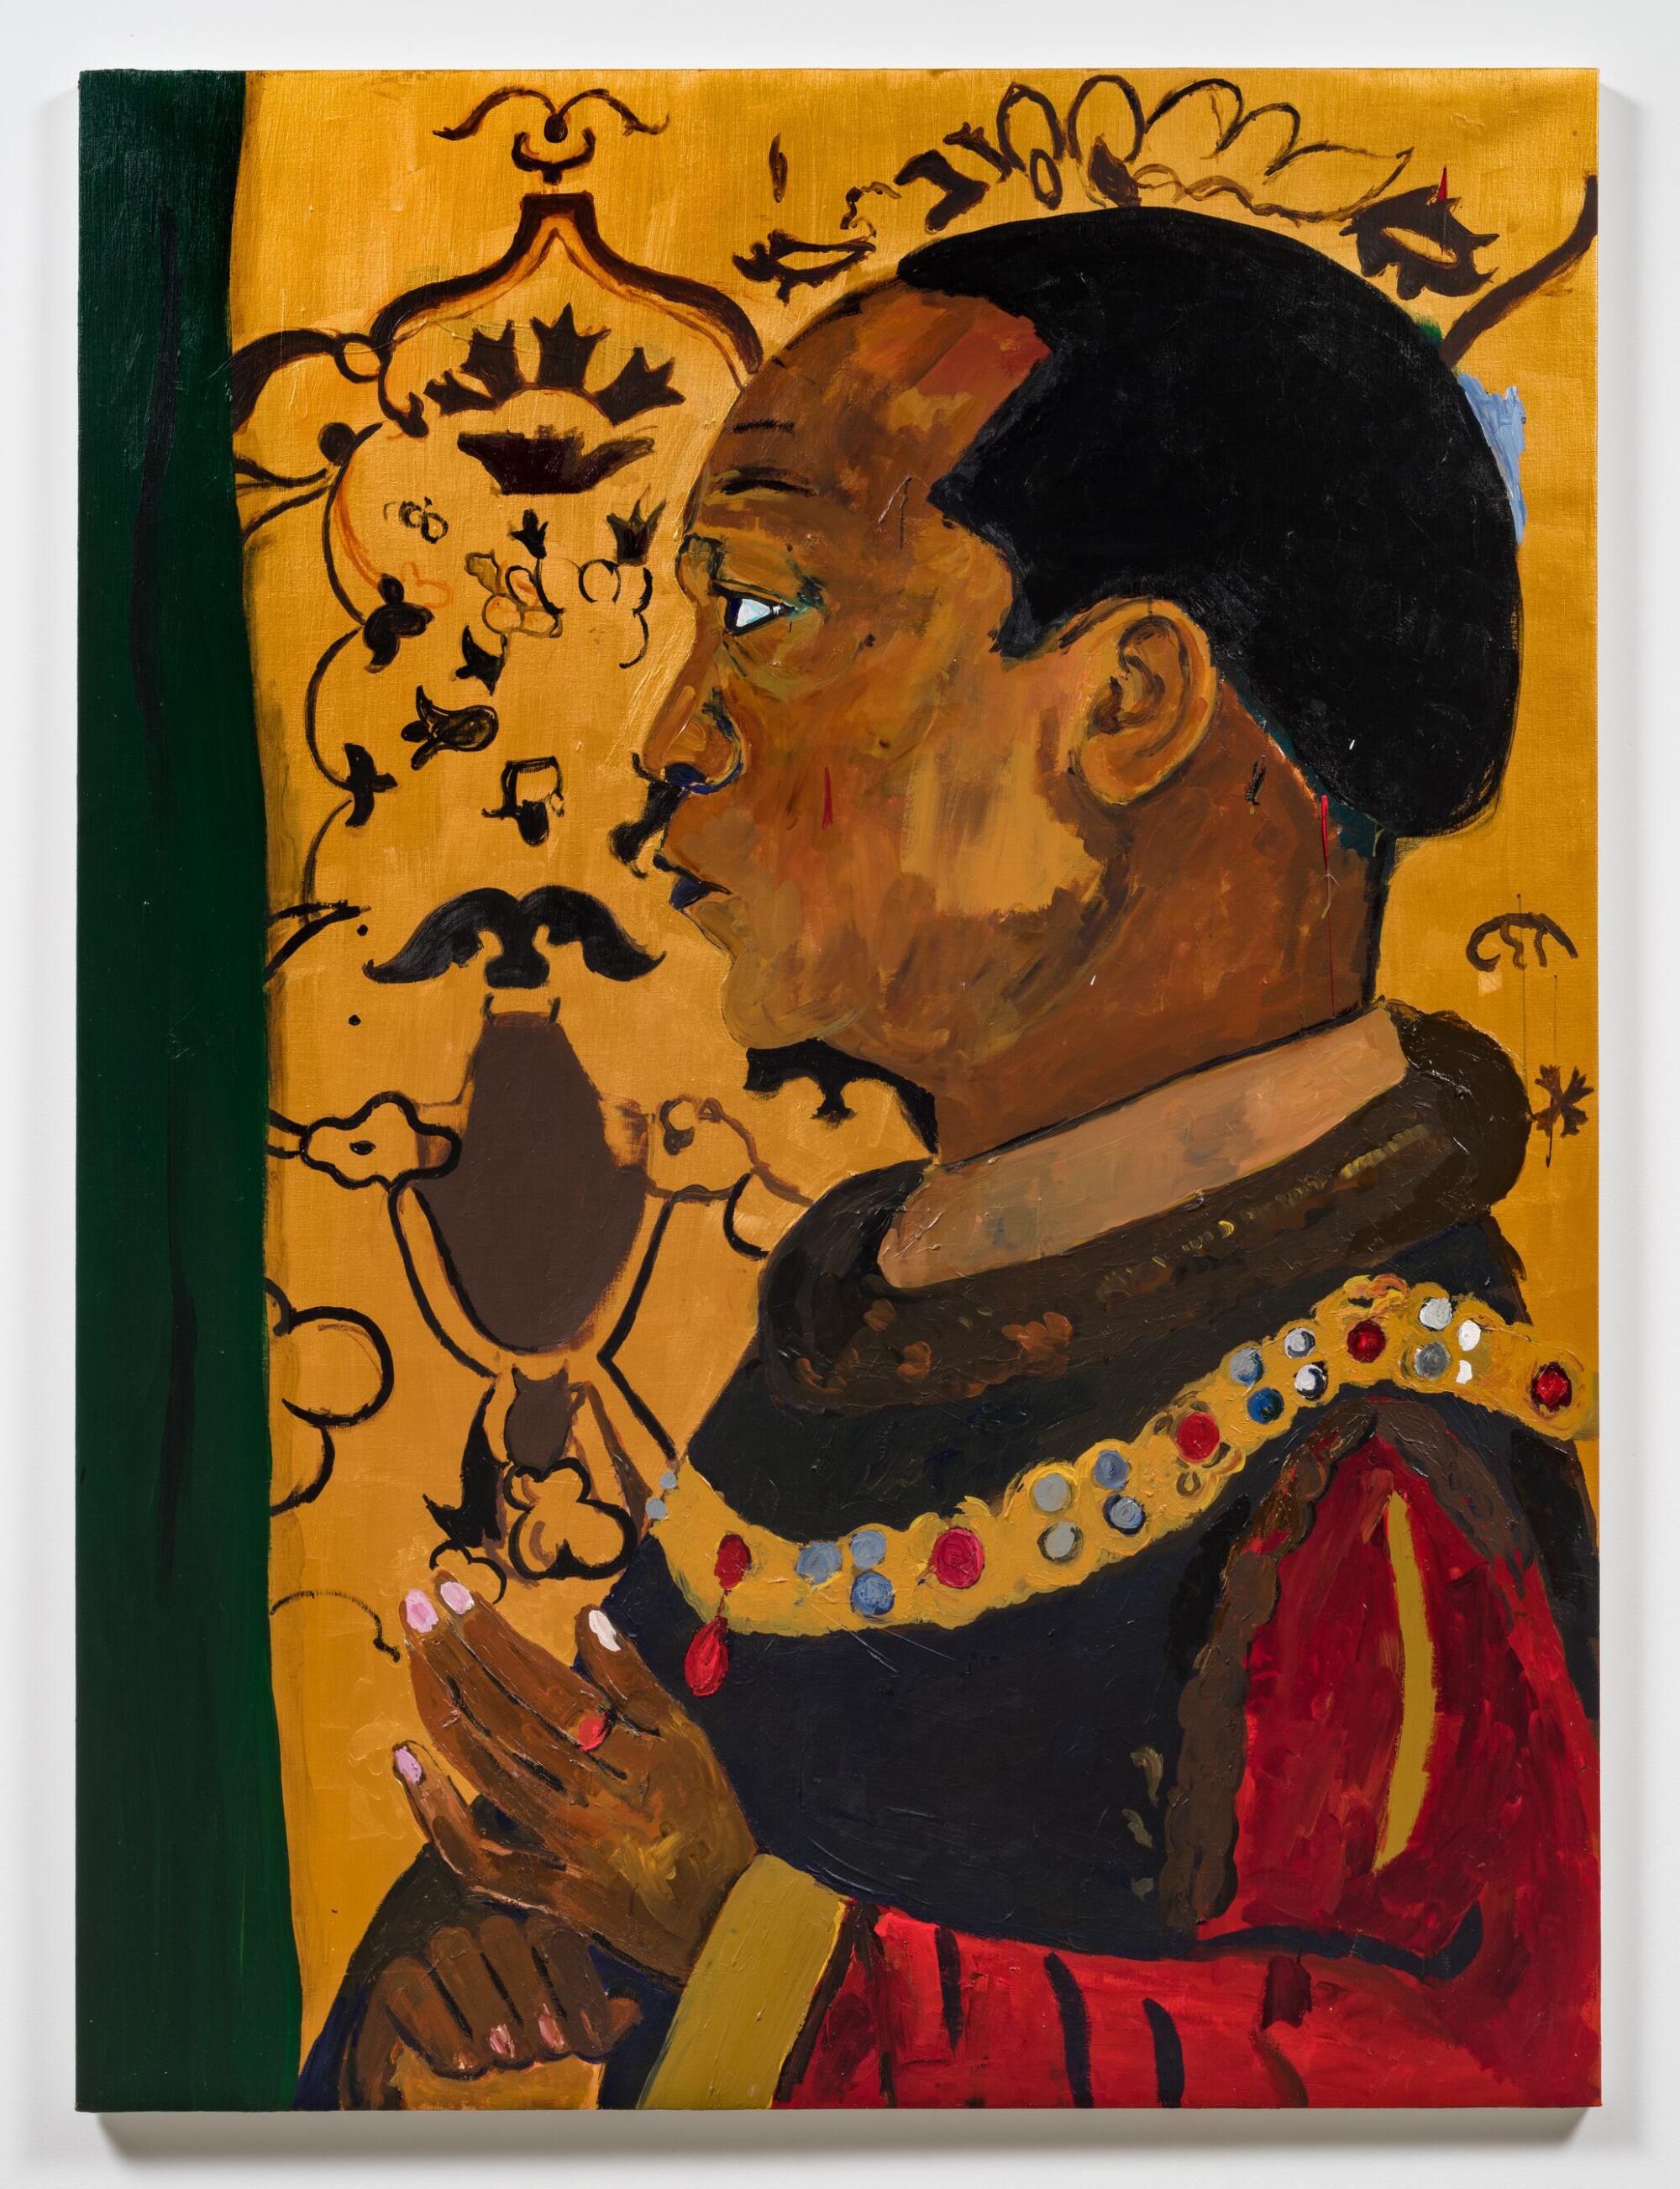 A vertical painting shows a Black man in profile wearing kingly robes against a golden background.